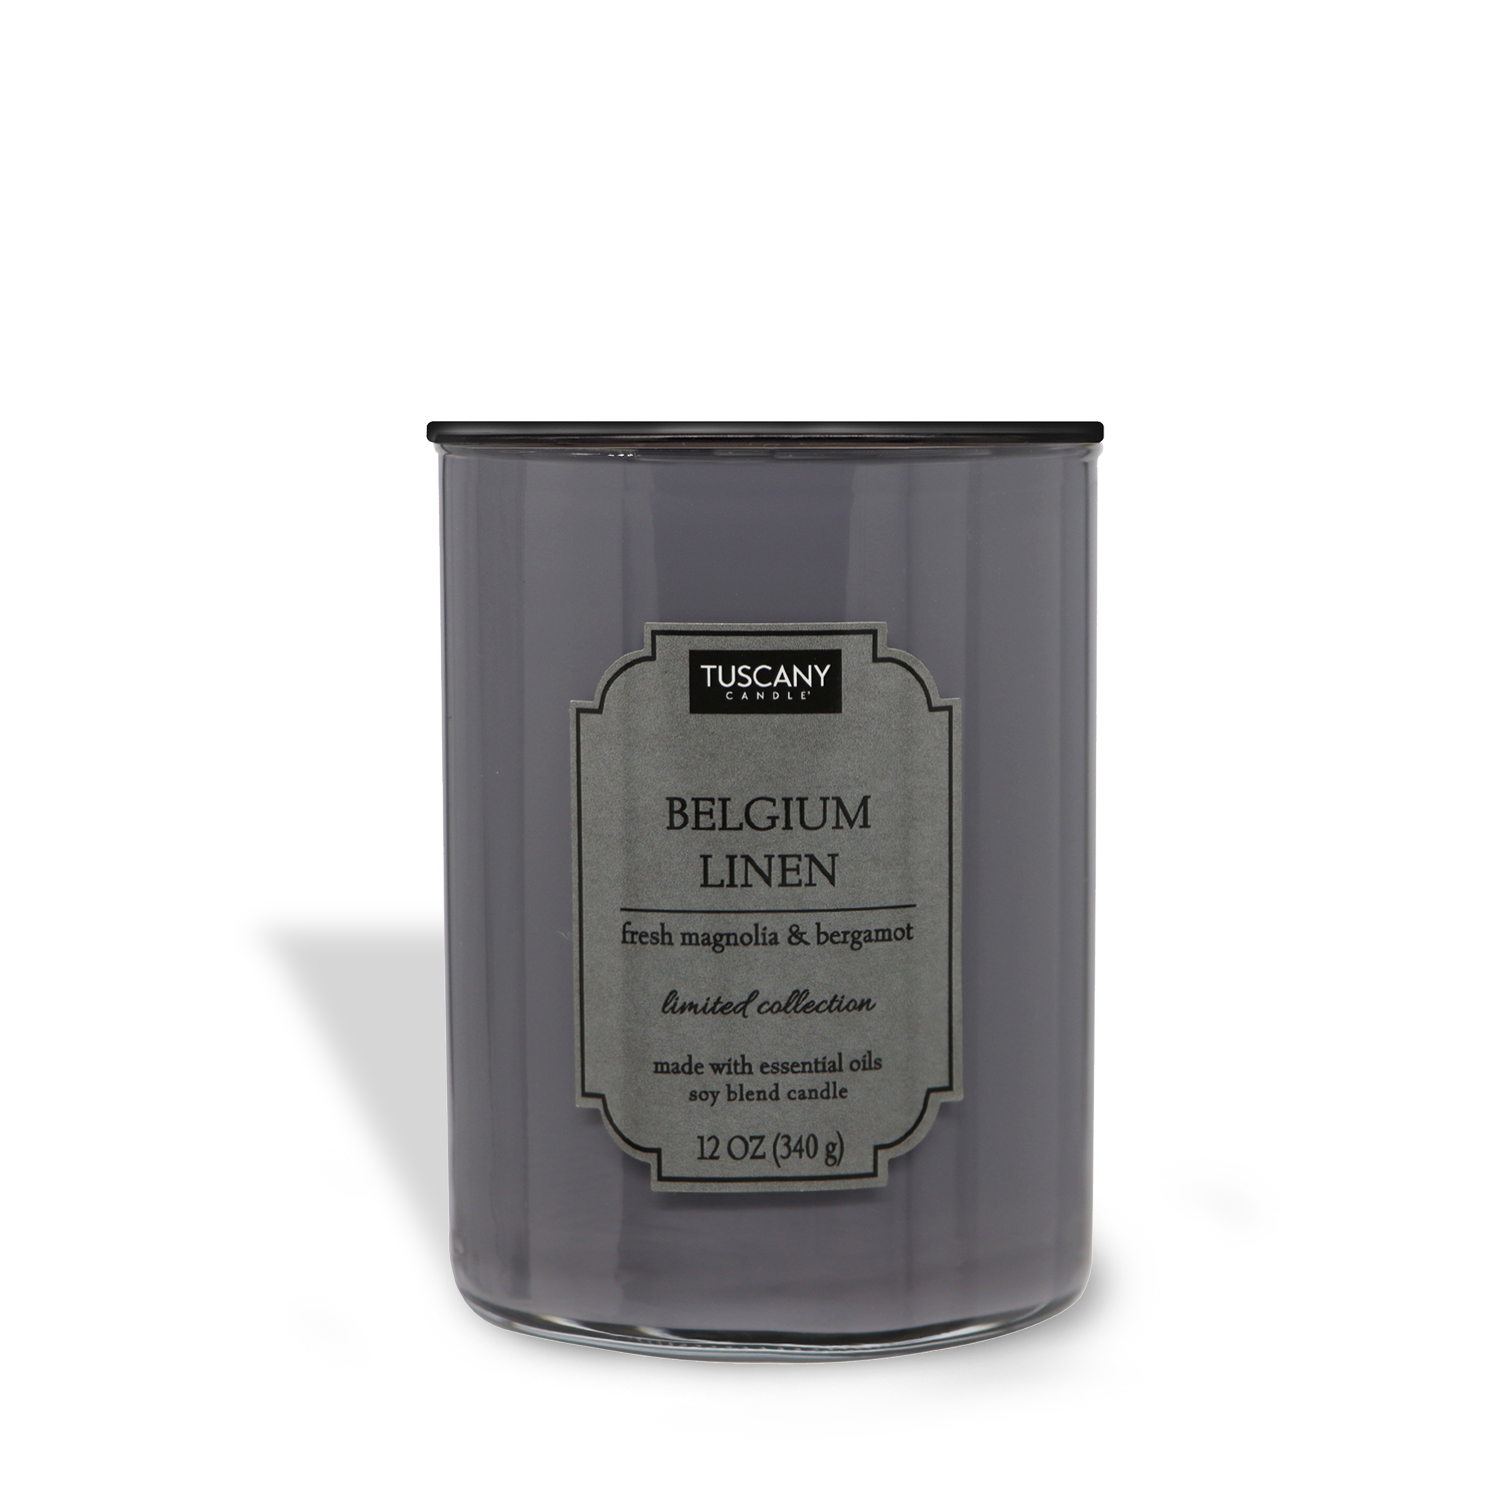 A gray candle in a jar labeled "Belgium Linen (12 oz) – Colorsplash Collection candle" with scent notes of magnolia and bergamot, indicating it's part of the Tuscany Candle® EVD collection and made with essential oils.